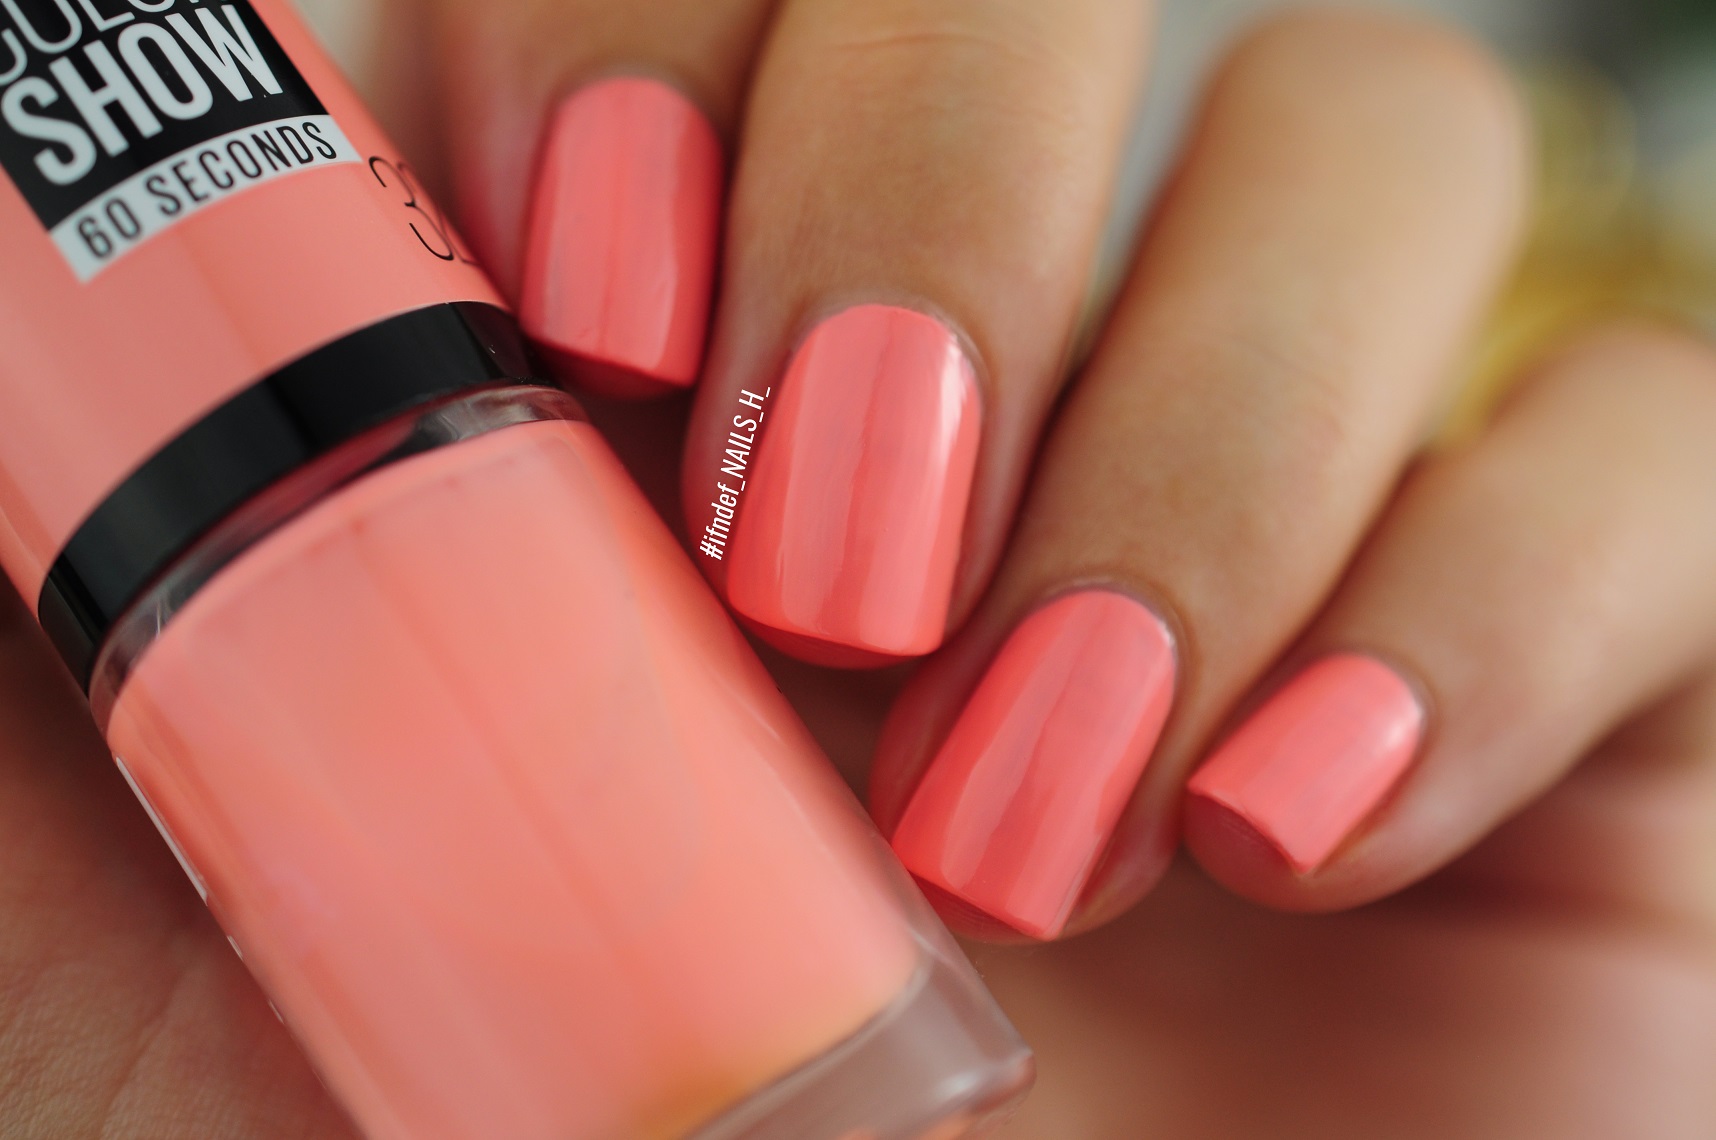 Maybelline Color Show Canal Street Coral Swatch